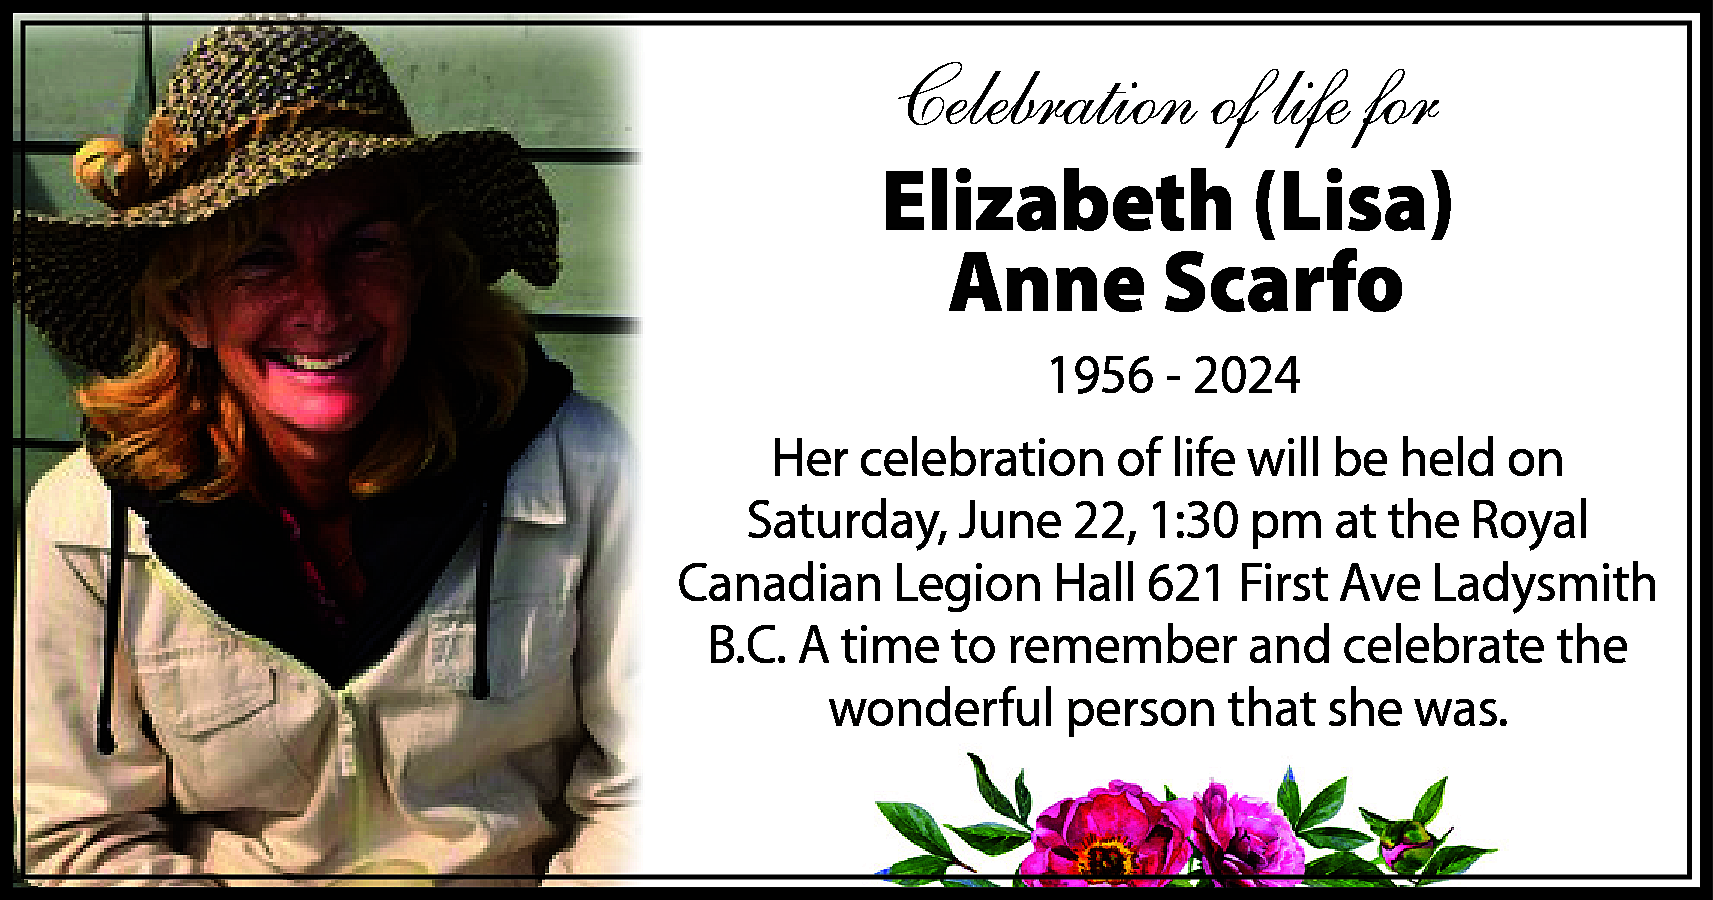 Celebration of life for <br>Elizabeth  Celebration of life for  Elizabeth (Lisa)  Anne Scarfo  1956 - 2024  Her celebration of life will be held on  Saturday, June 22, 1:30 pm at the Royal  Canadian Legion Hall 621 First Ave Ladysmith  B.C. A time to remember and celebrate the  wonderful person that she was.    